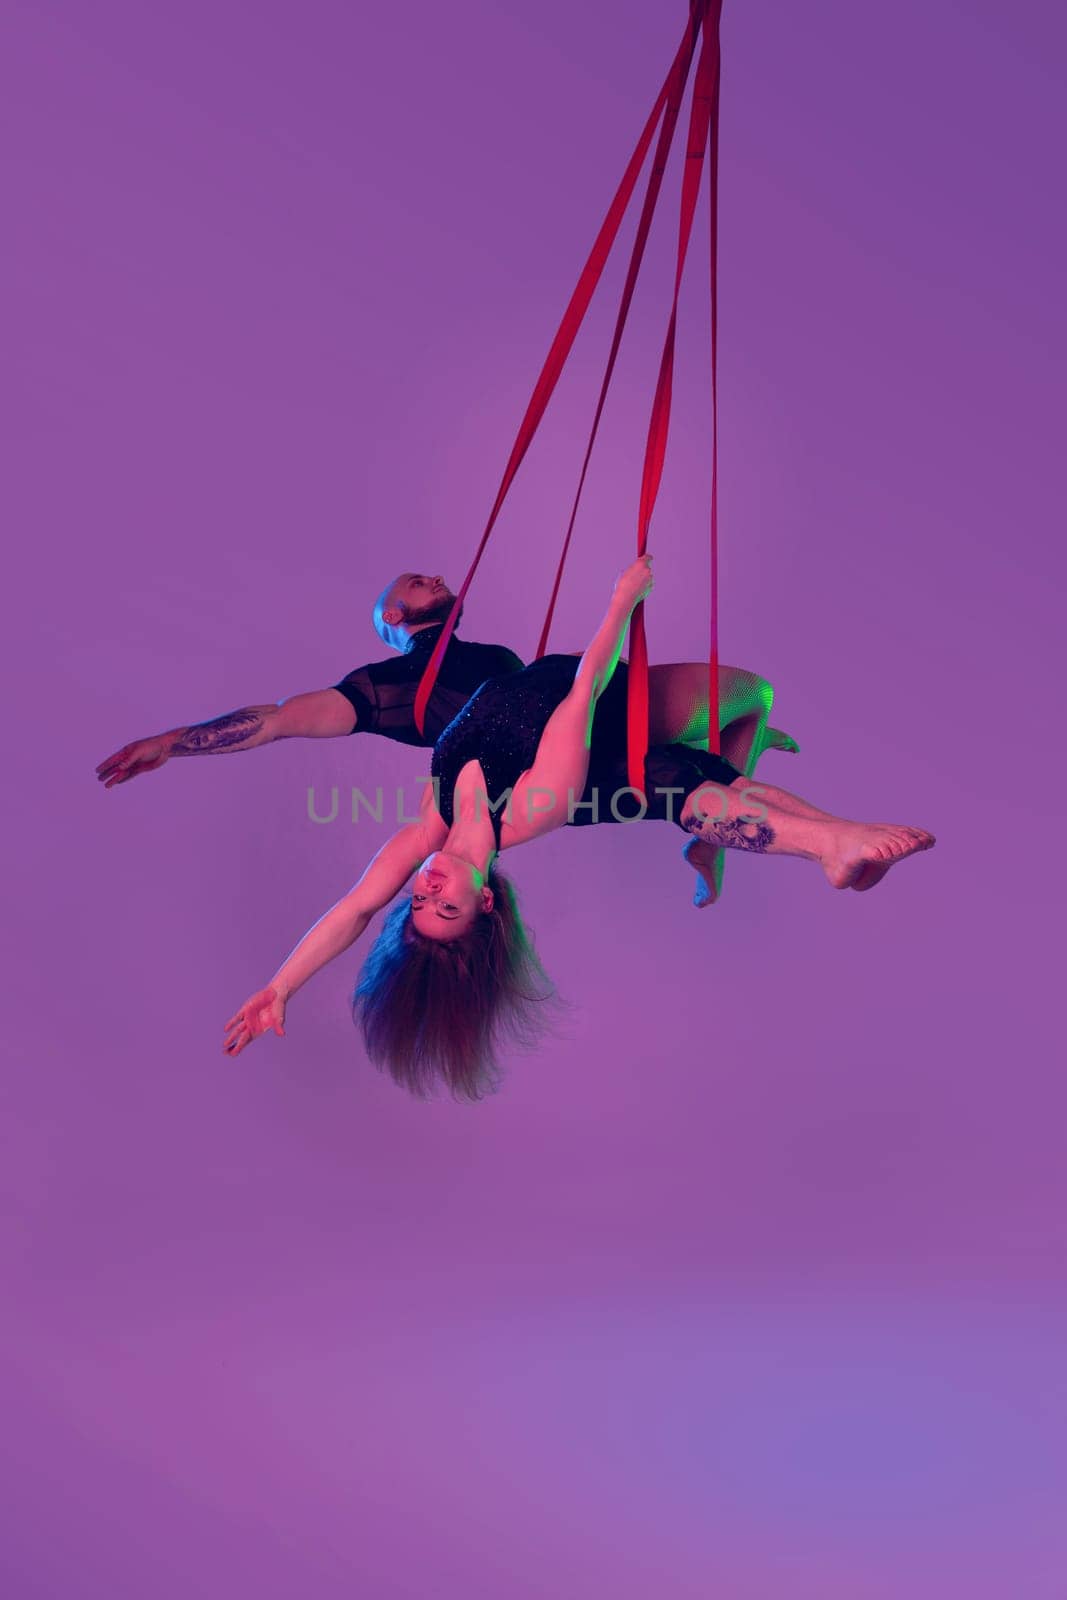 Gymnasts performance on a red canvases. Charming maiden and handsome guy in a dark sport suits are doing acrobatic elements in a studio against a colorful background. She is laying on her partner. Dancing in the air with balance.